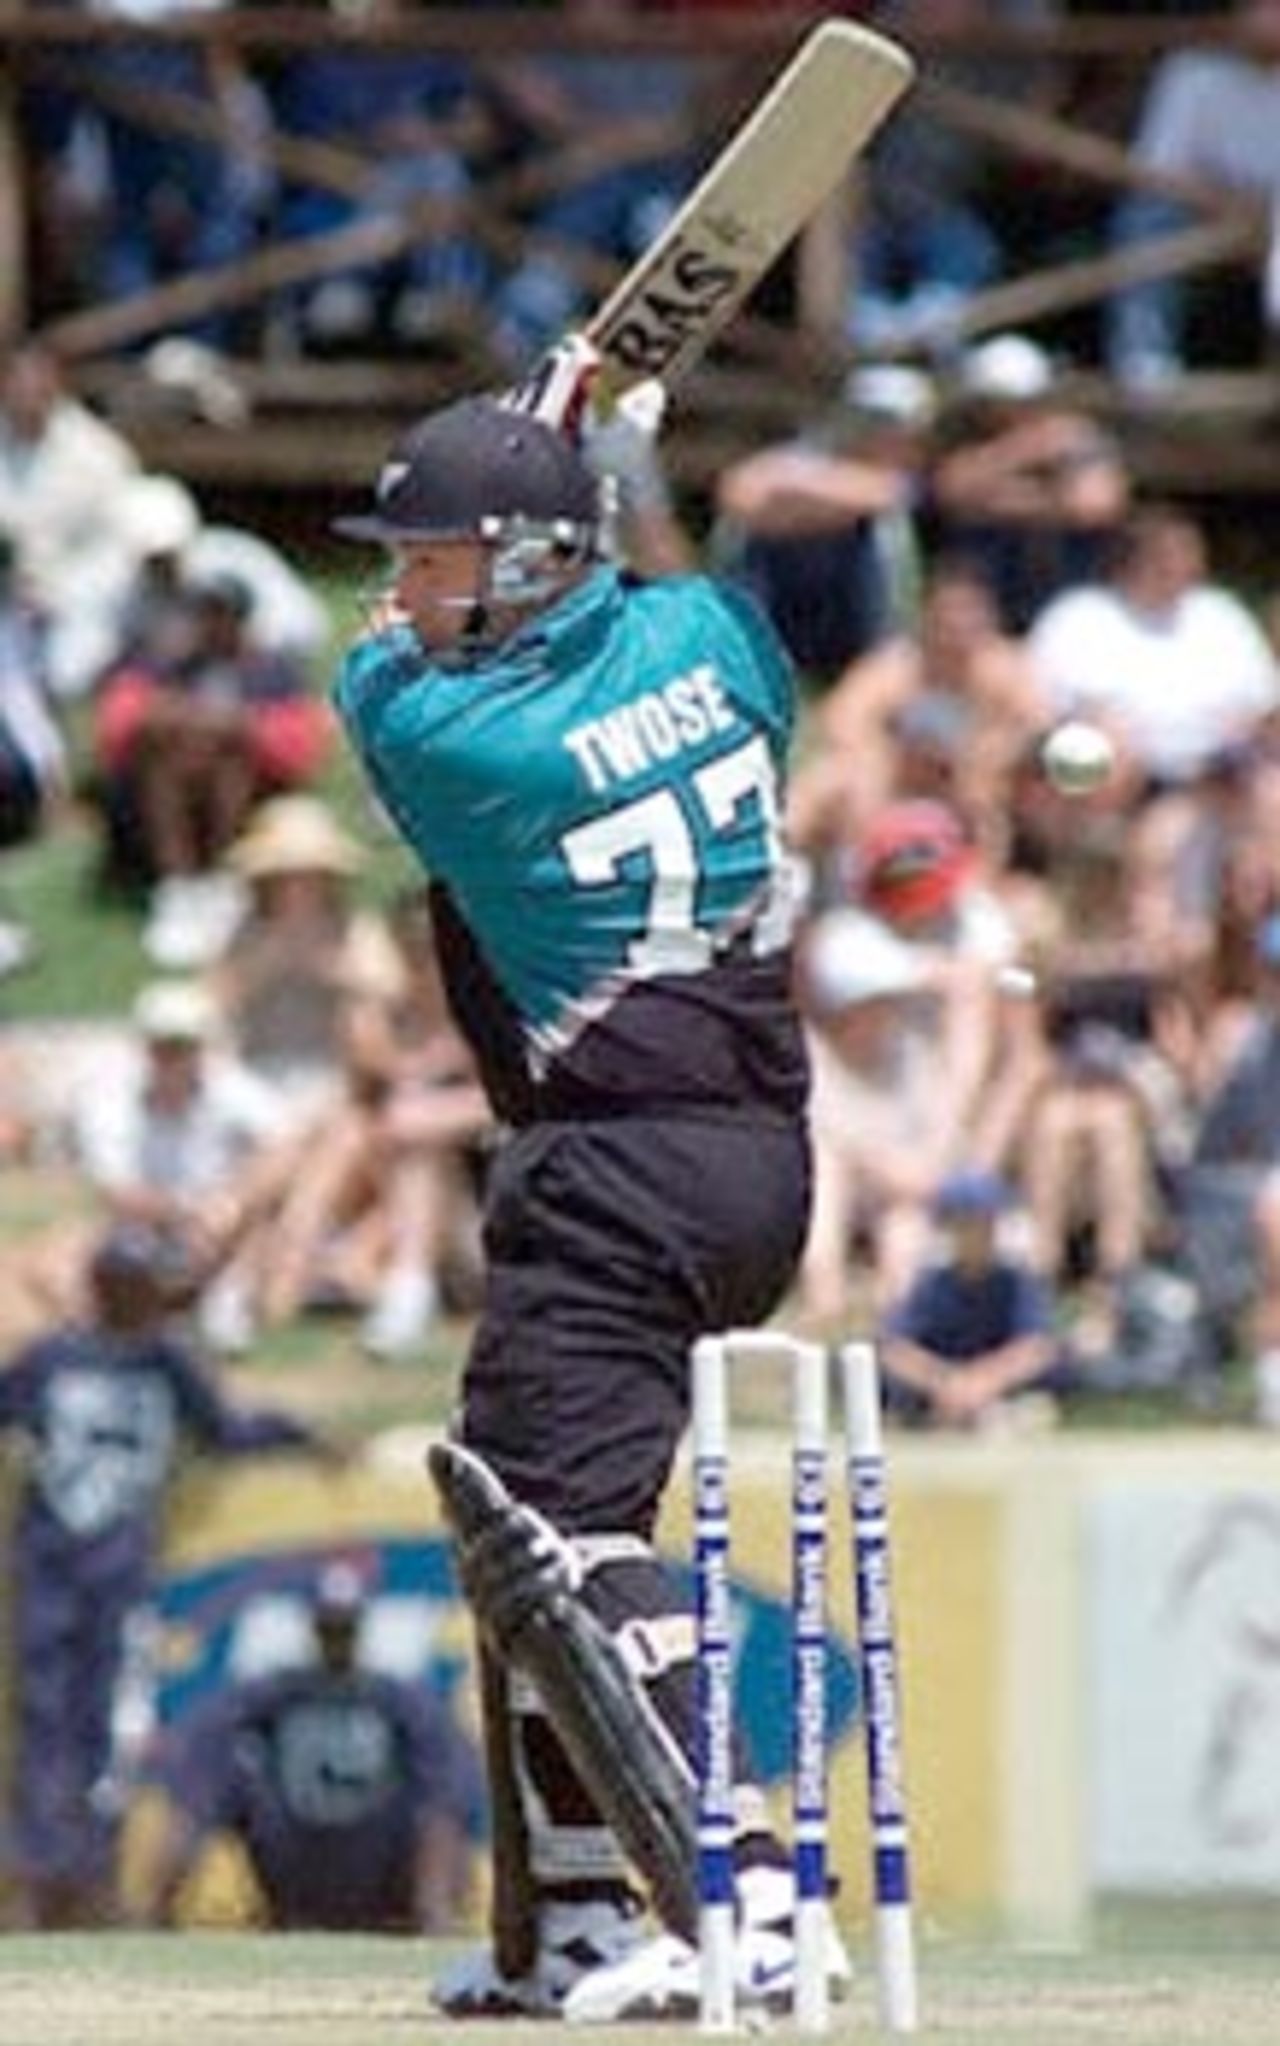 New Zealand batsman Roger Twose is clean bowled, New Zealand in South Africa 2000/01, 2nd One-Day International, South Africa v New Zealand, Willowmoore Park, Benoni, 22 October 2000.